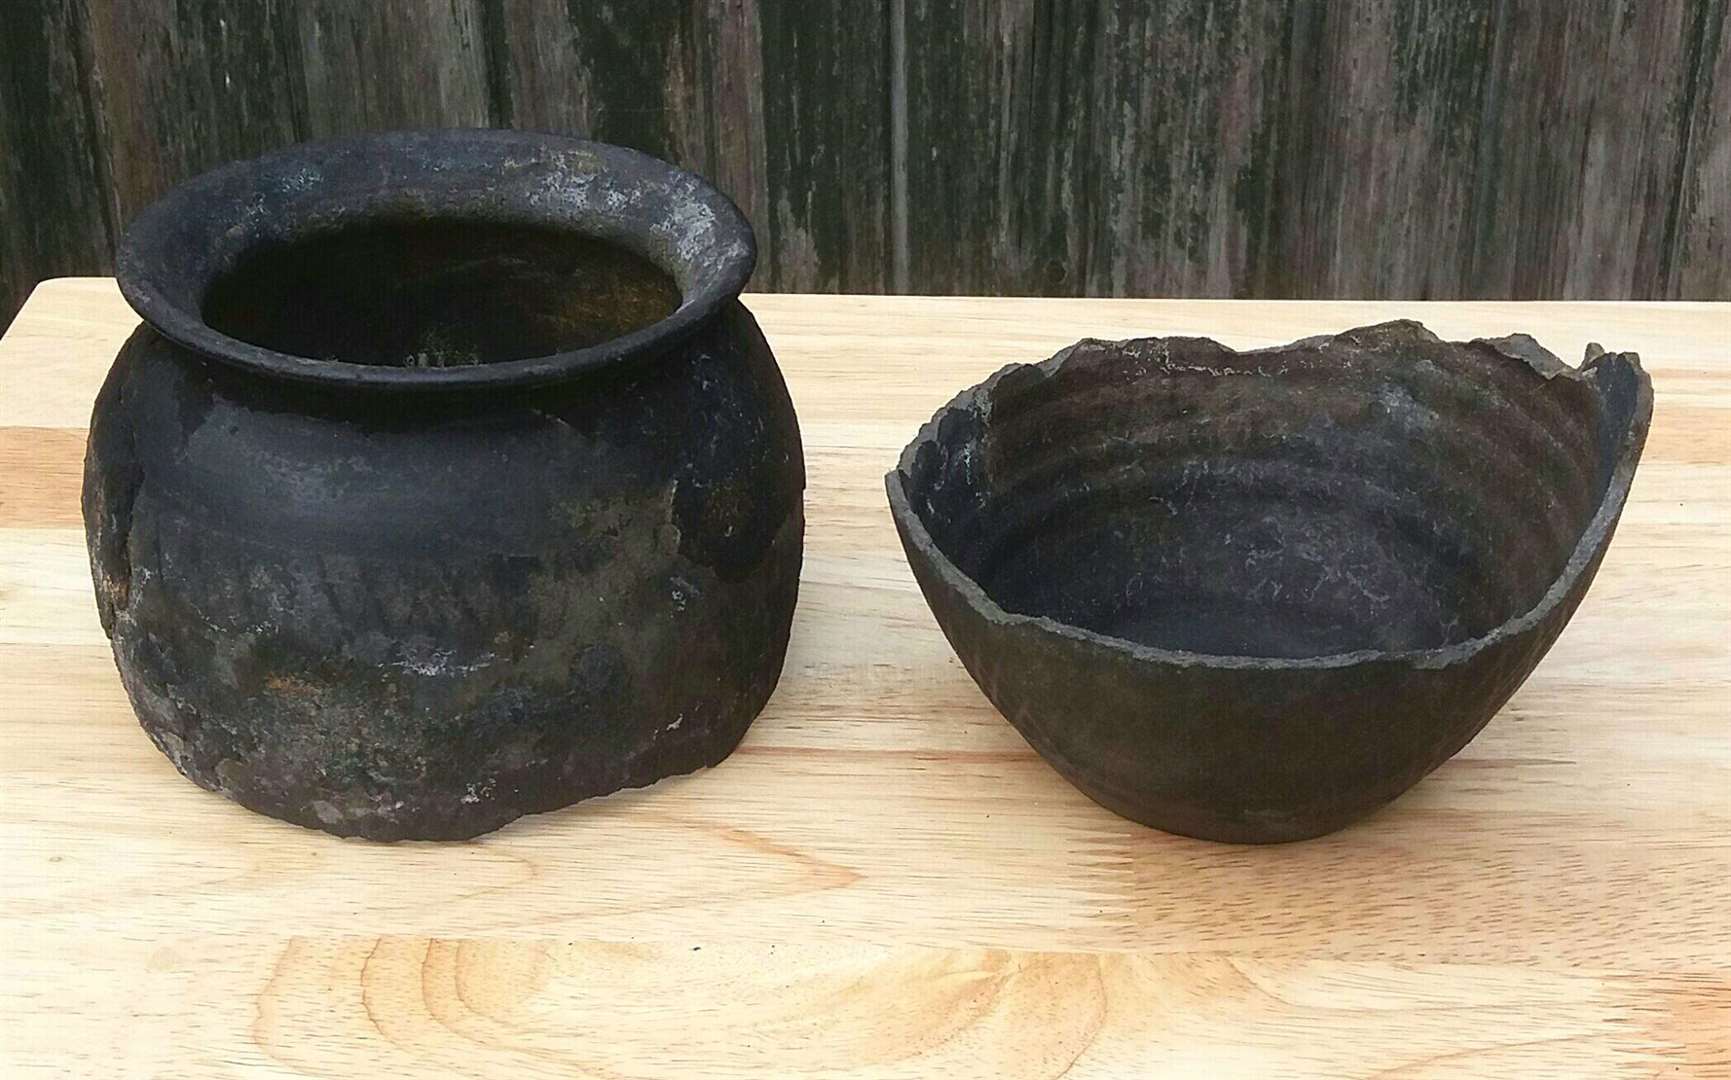 The two halves of the Roman pot (4966510)